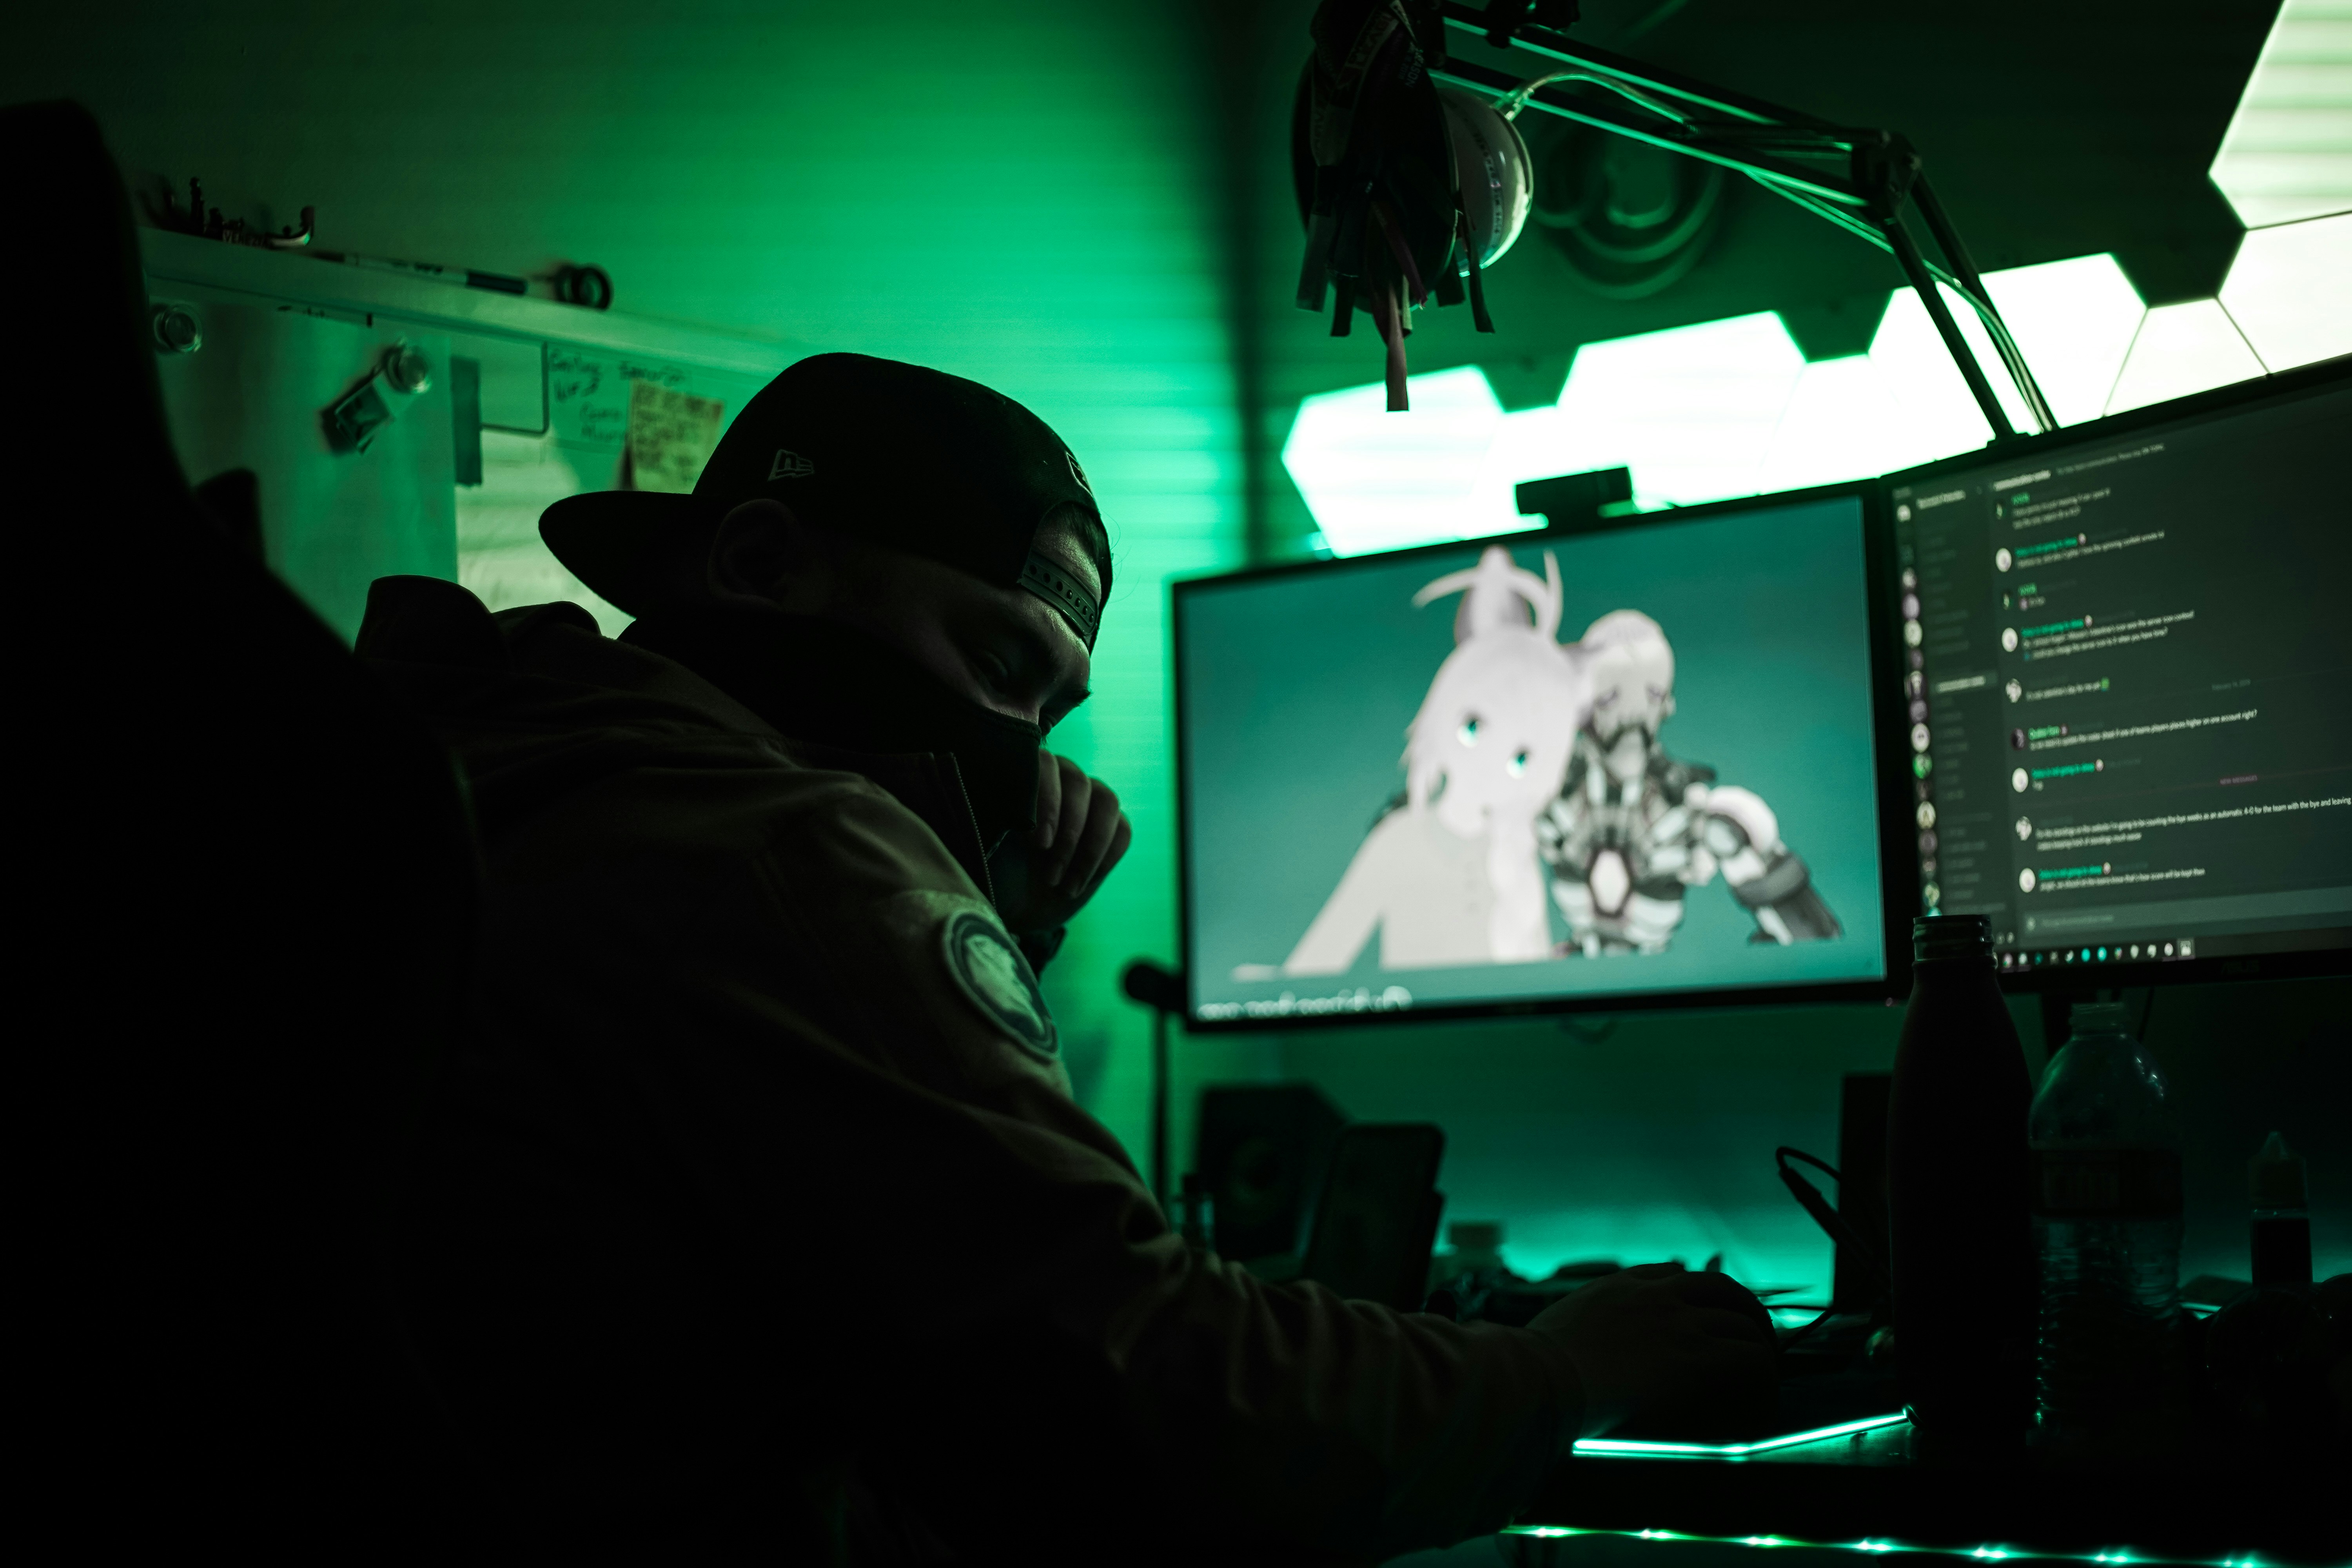 Gamer wearing a mask looks away from glowing computer and light panels.